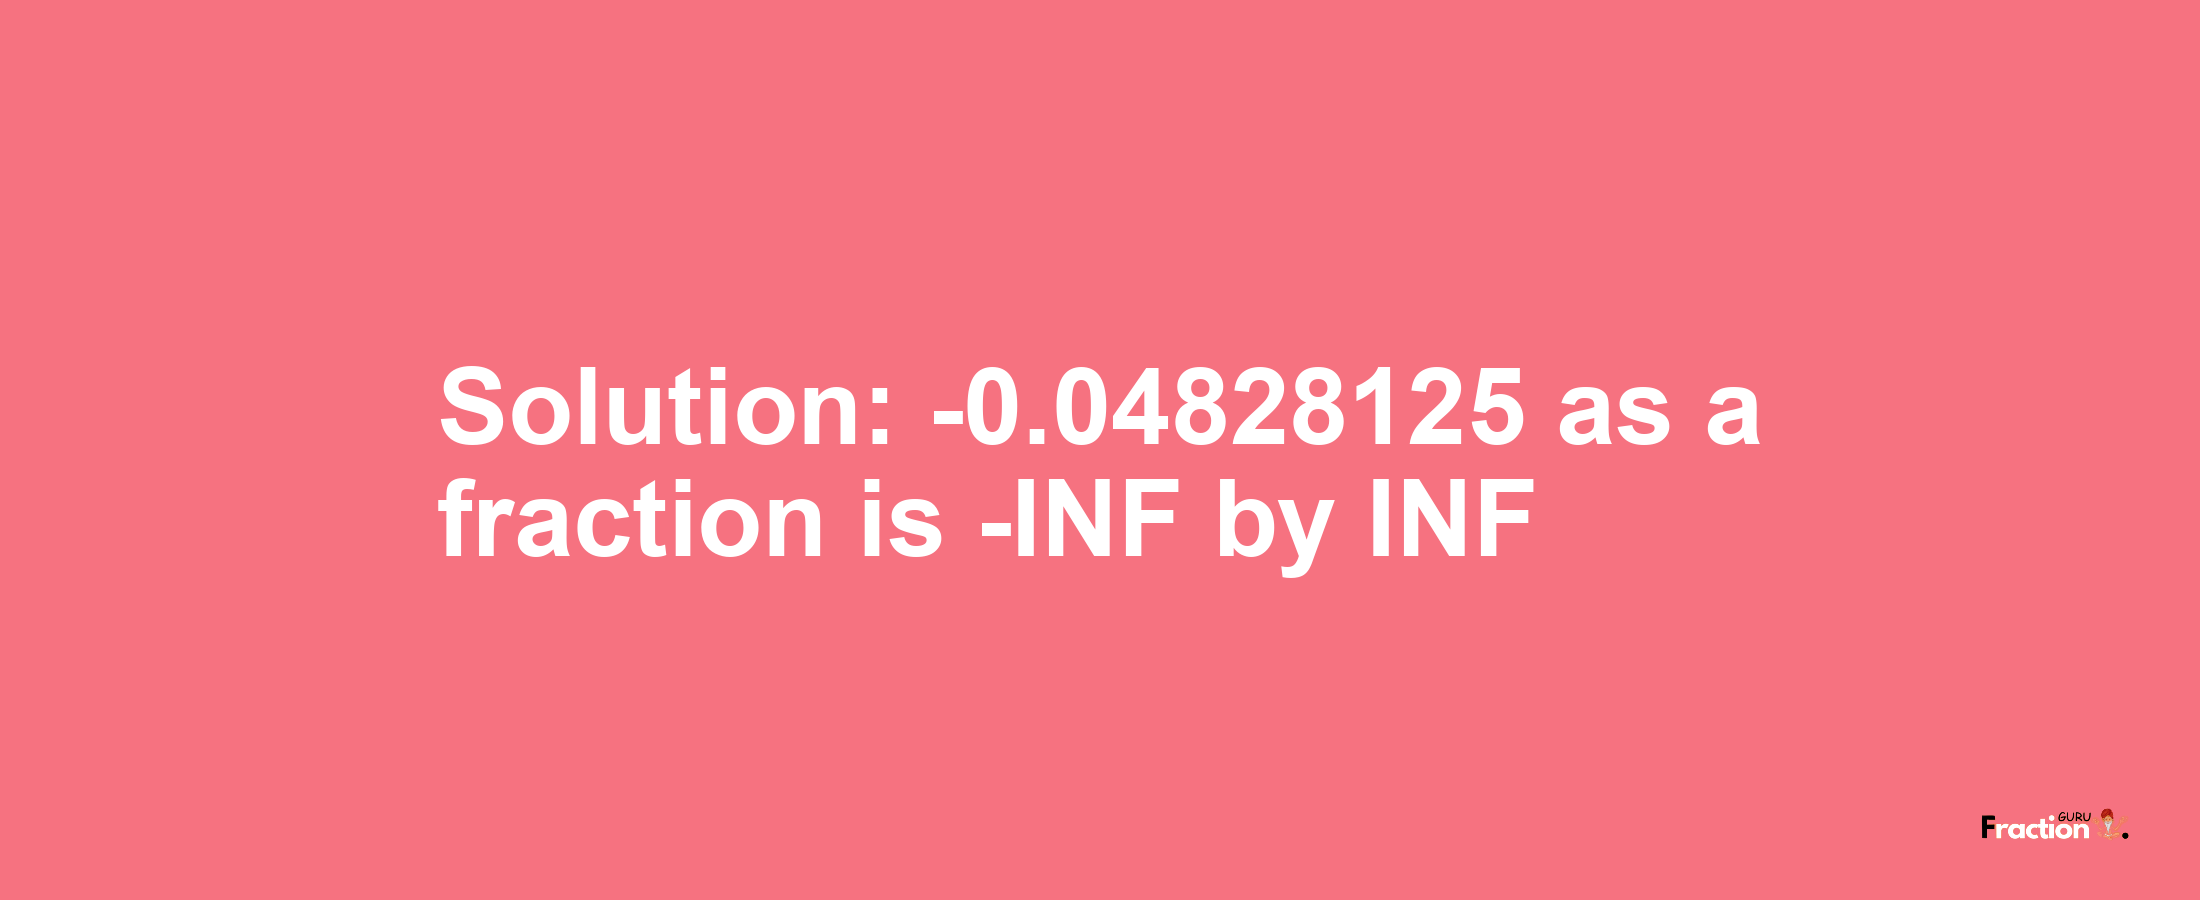 Solution:-0.04828125 as a fraction is -INF/INF